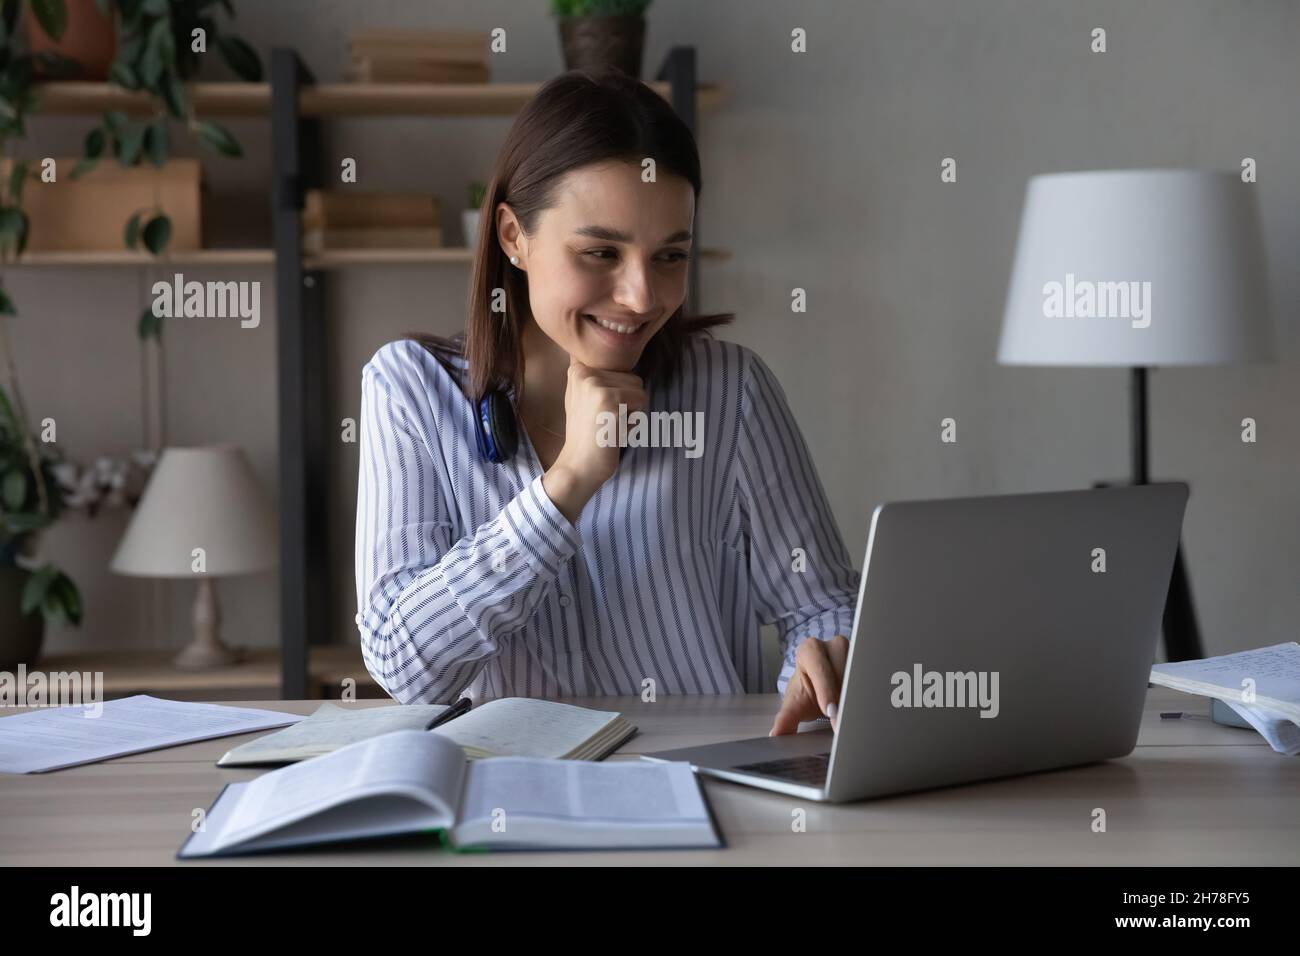 Smiling attractive young woman web surfing educational information online. Stock Photo